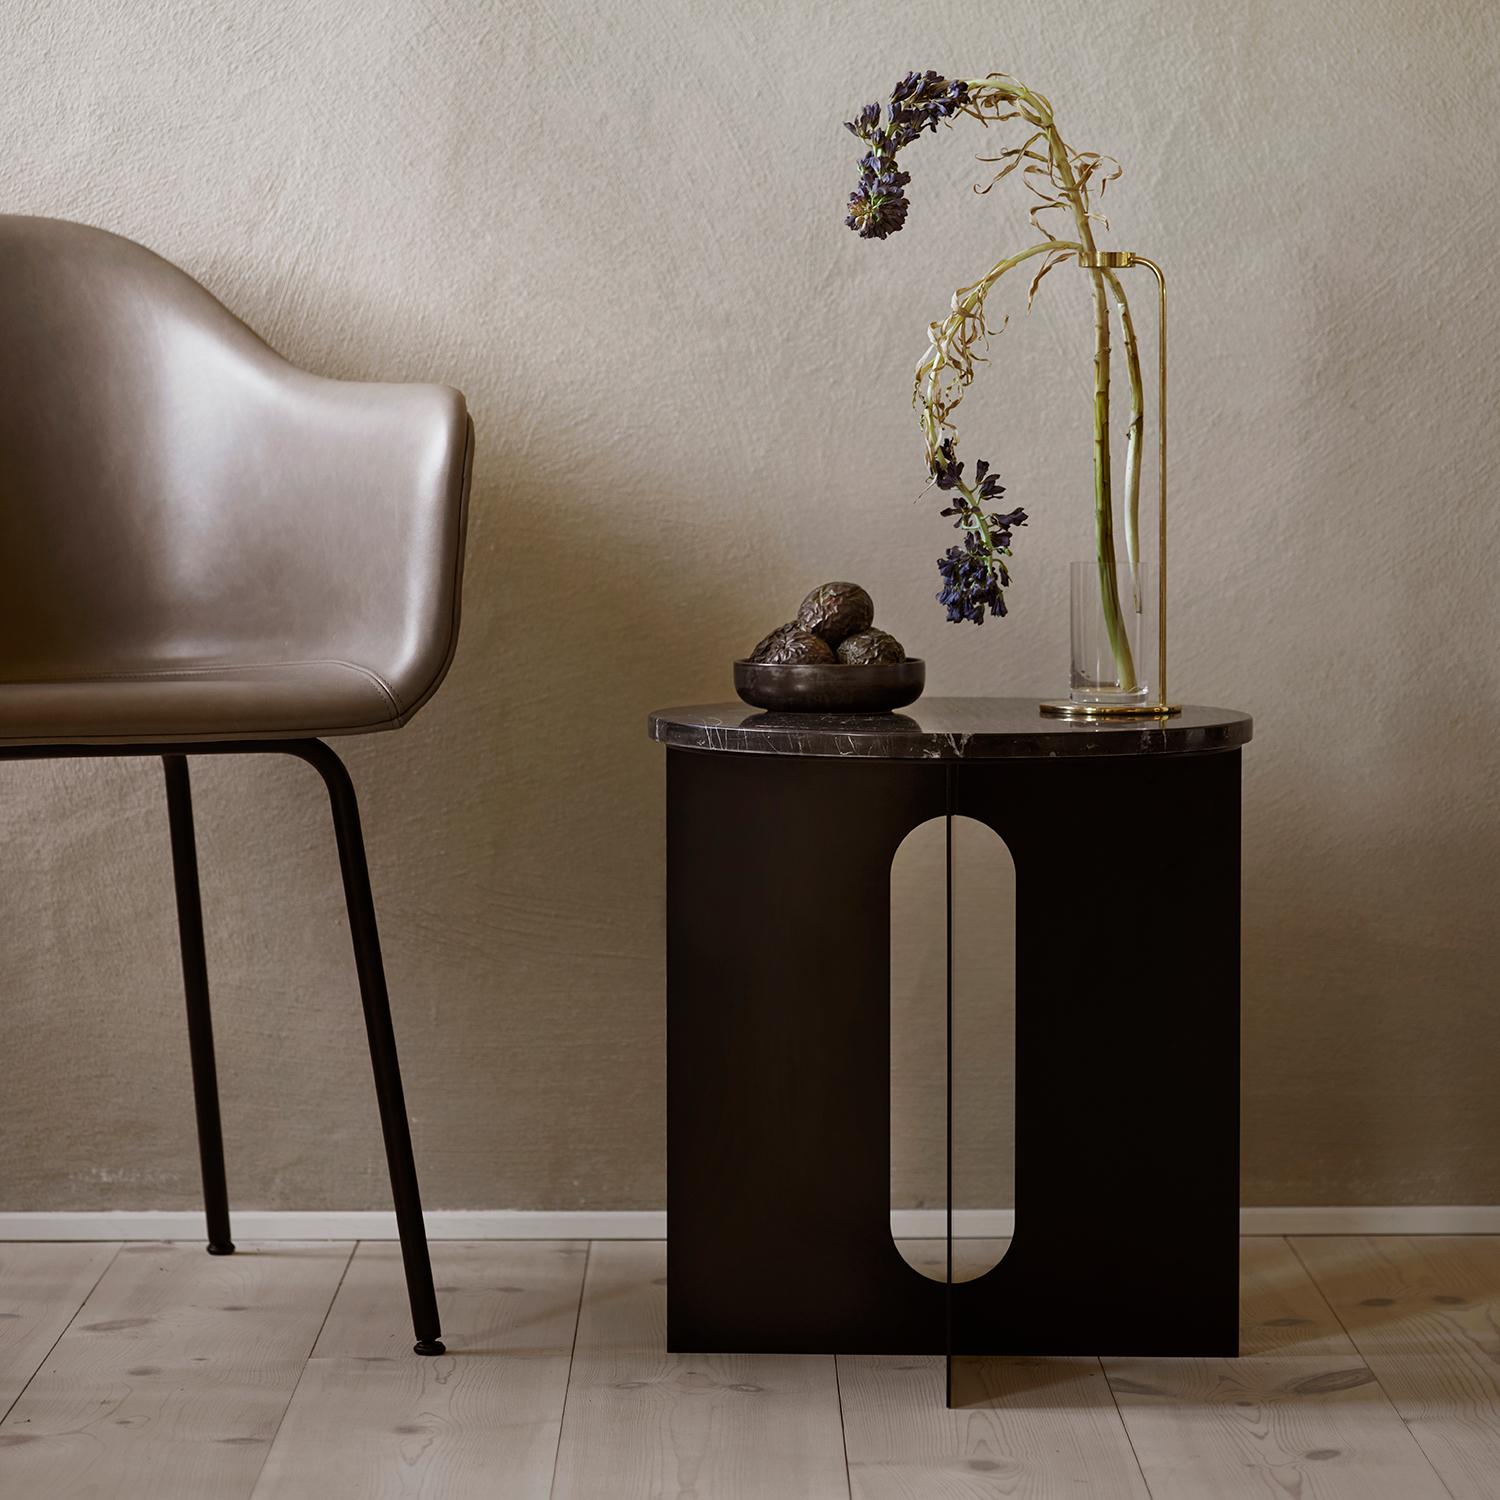 Powder-Coated Androgyne Side Table, Steel Base in Black, Tabletop in Black Marble